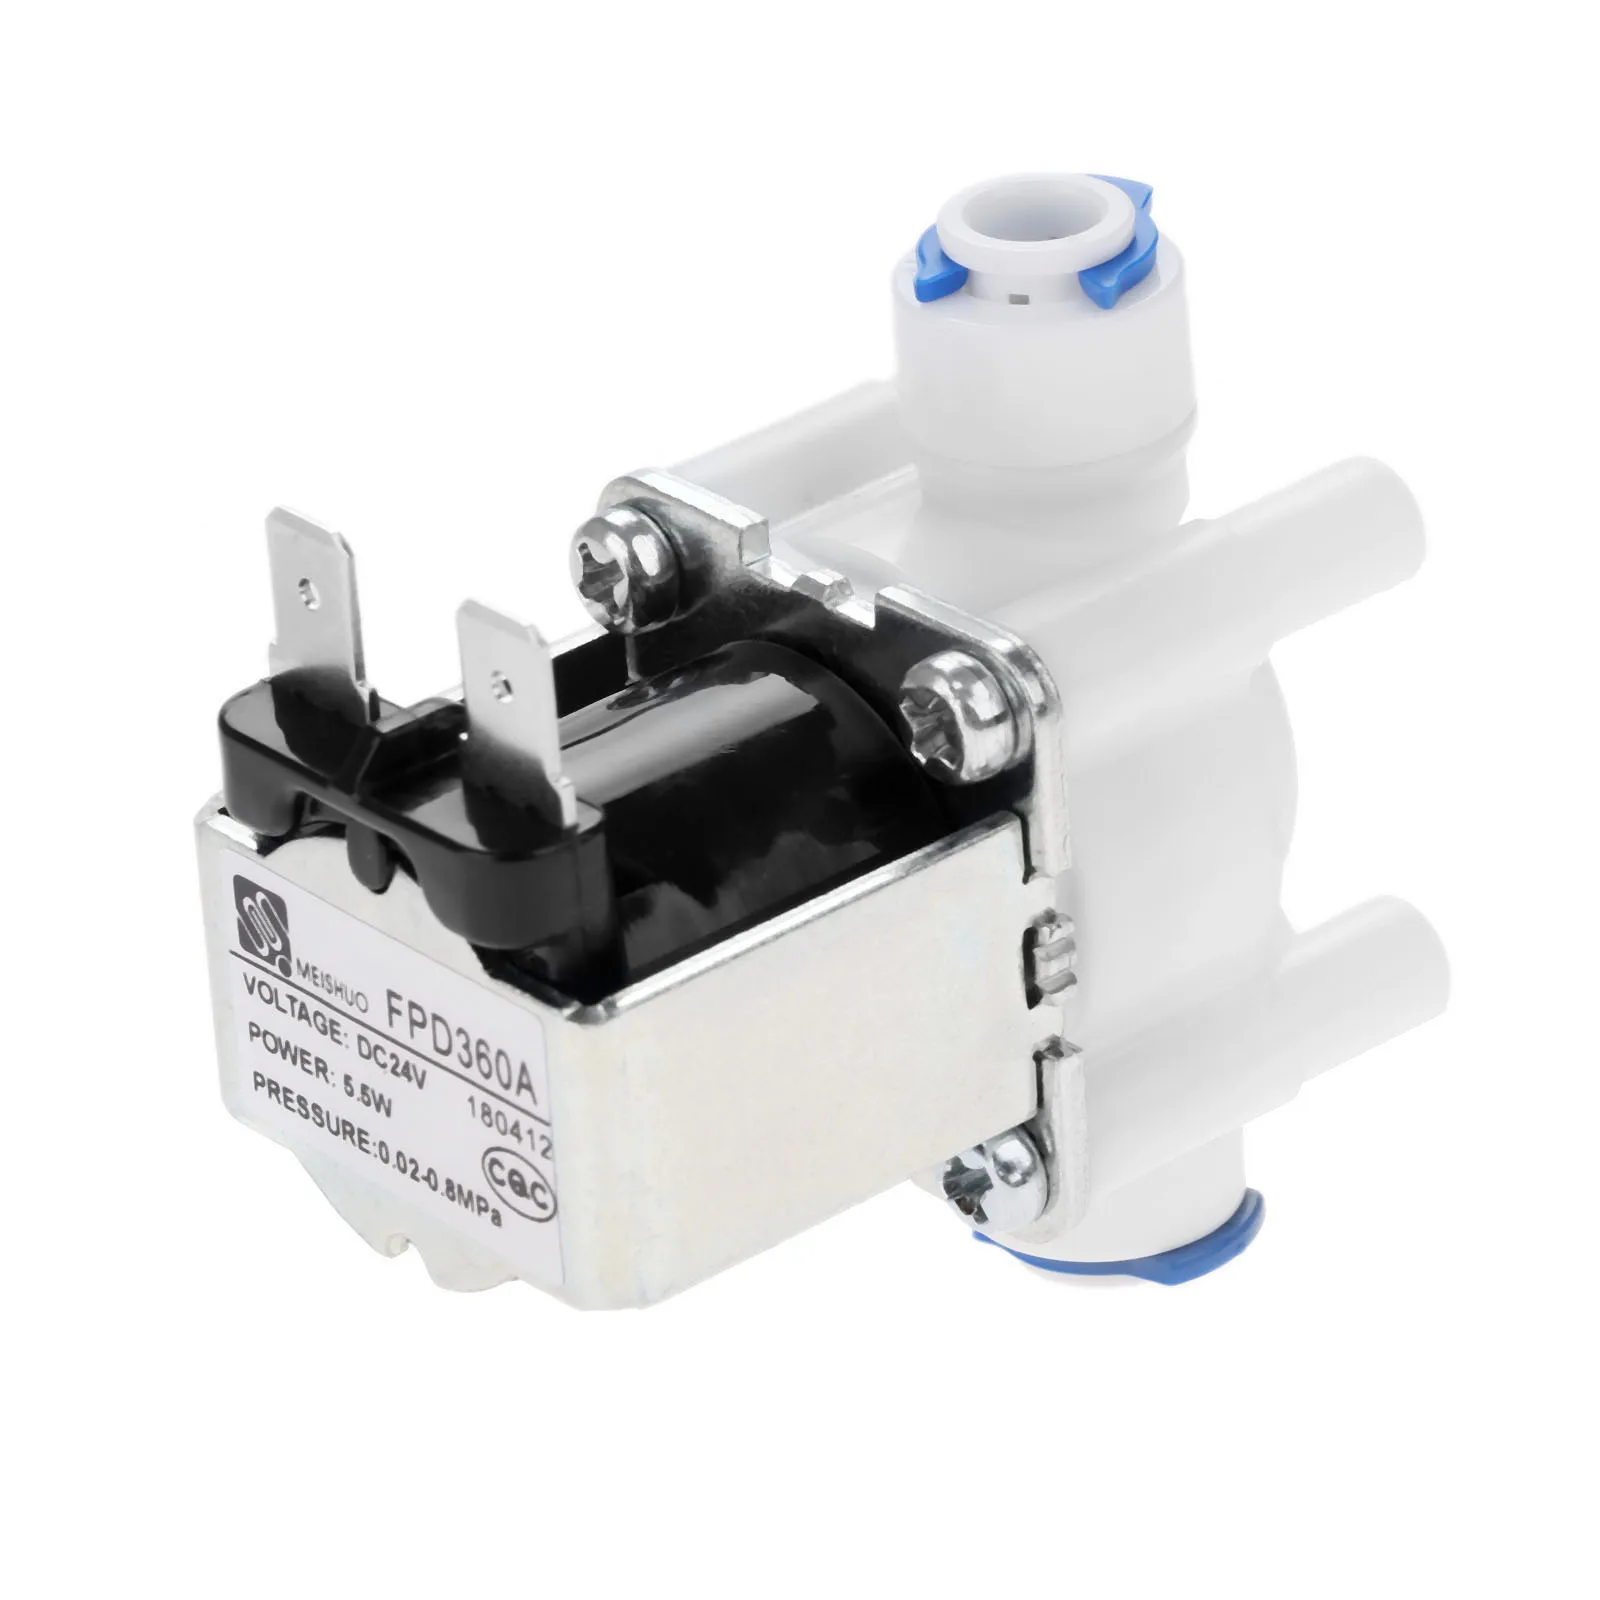 1Pc Electric Water Valve 24V DC Water Solenoid Valve 1/4 Hose Connector for RO Reverse Osmosis System Water Purifier Controller 3pcs 1 4 inch flow control valve ro reverse osmosis membrane water purifier waste water than the regulator control valve